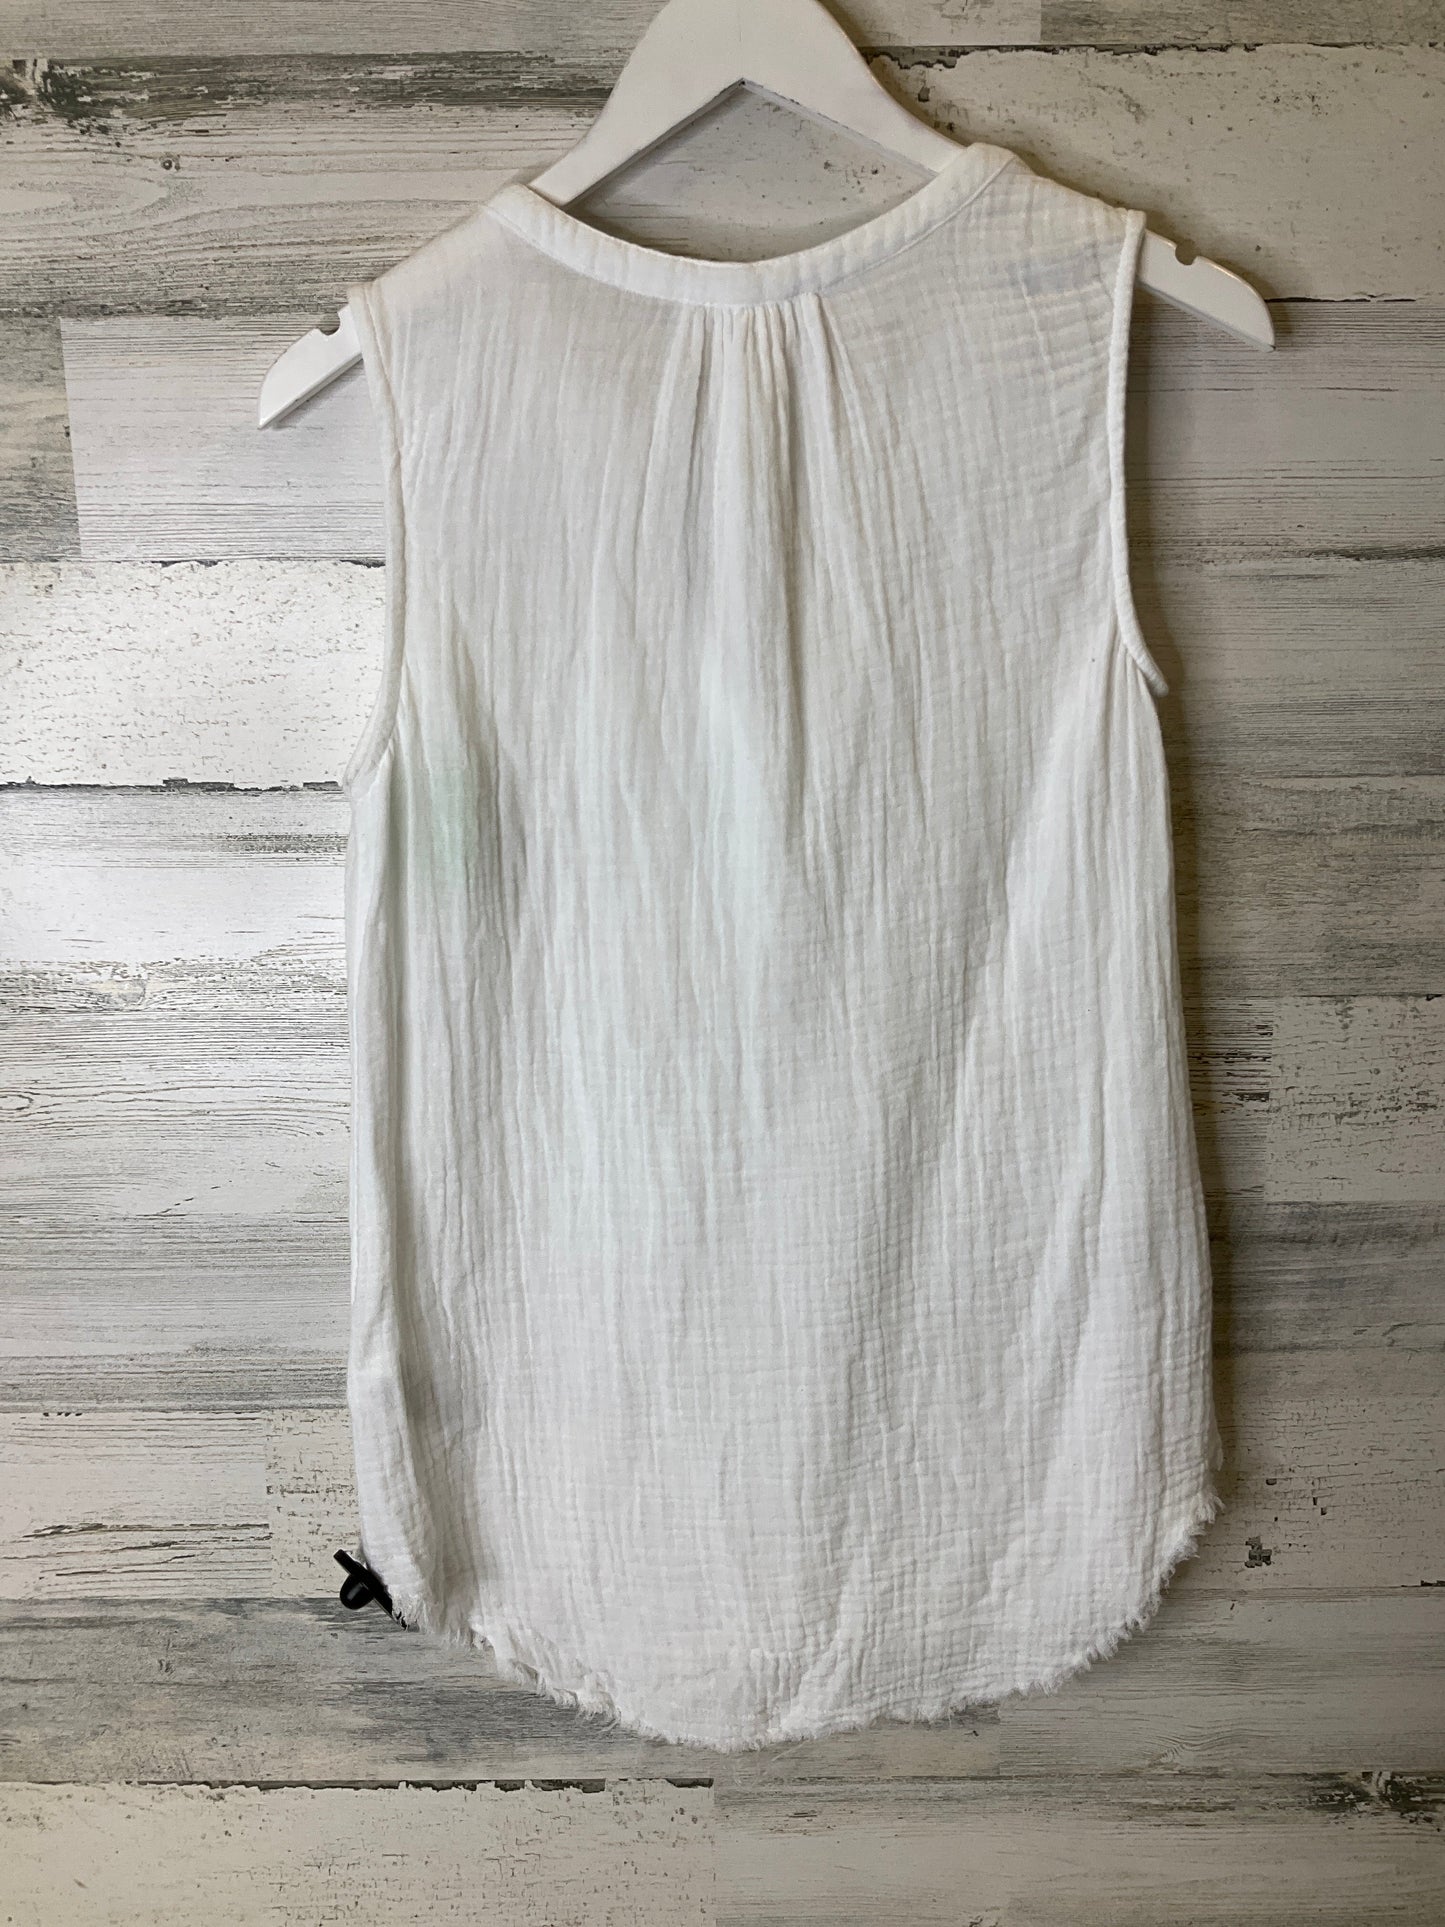 Top Sleeveless By Beachlunchlounge  Size: Xs